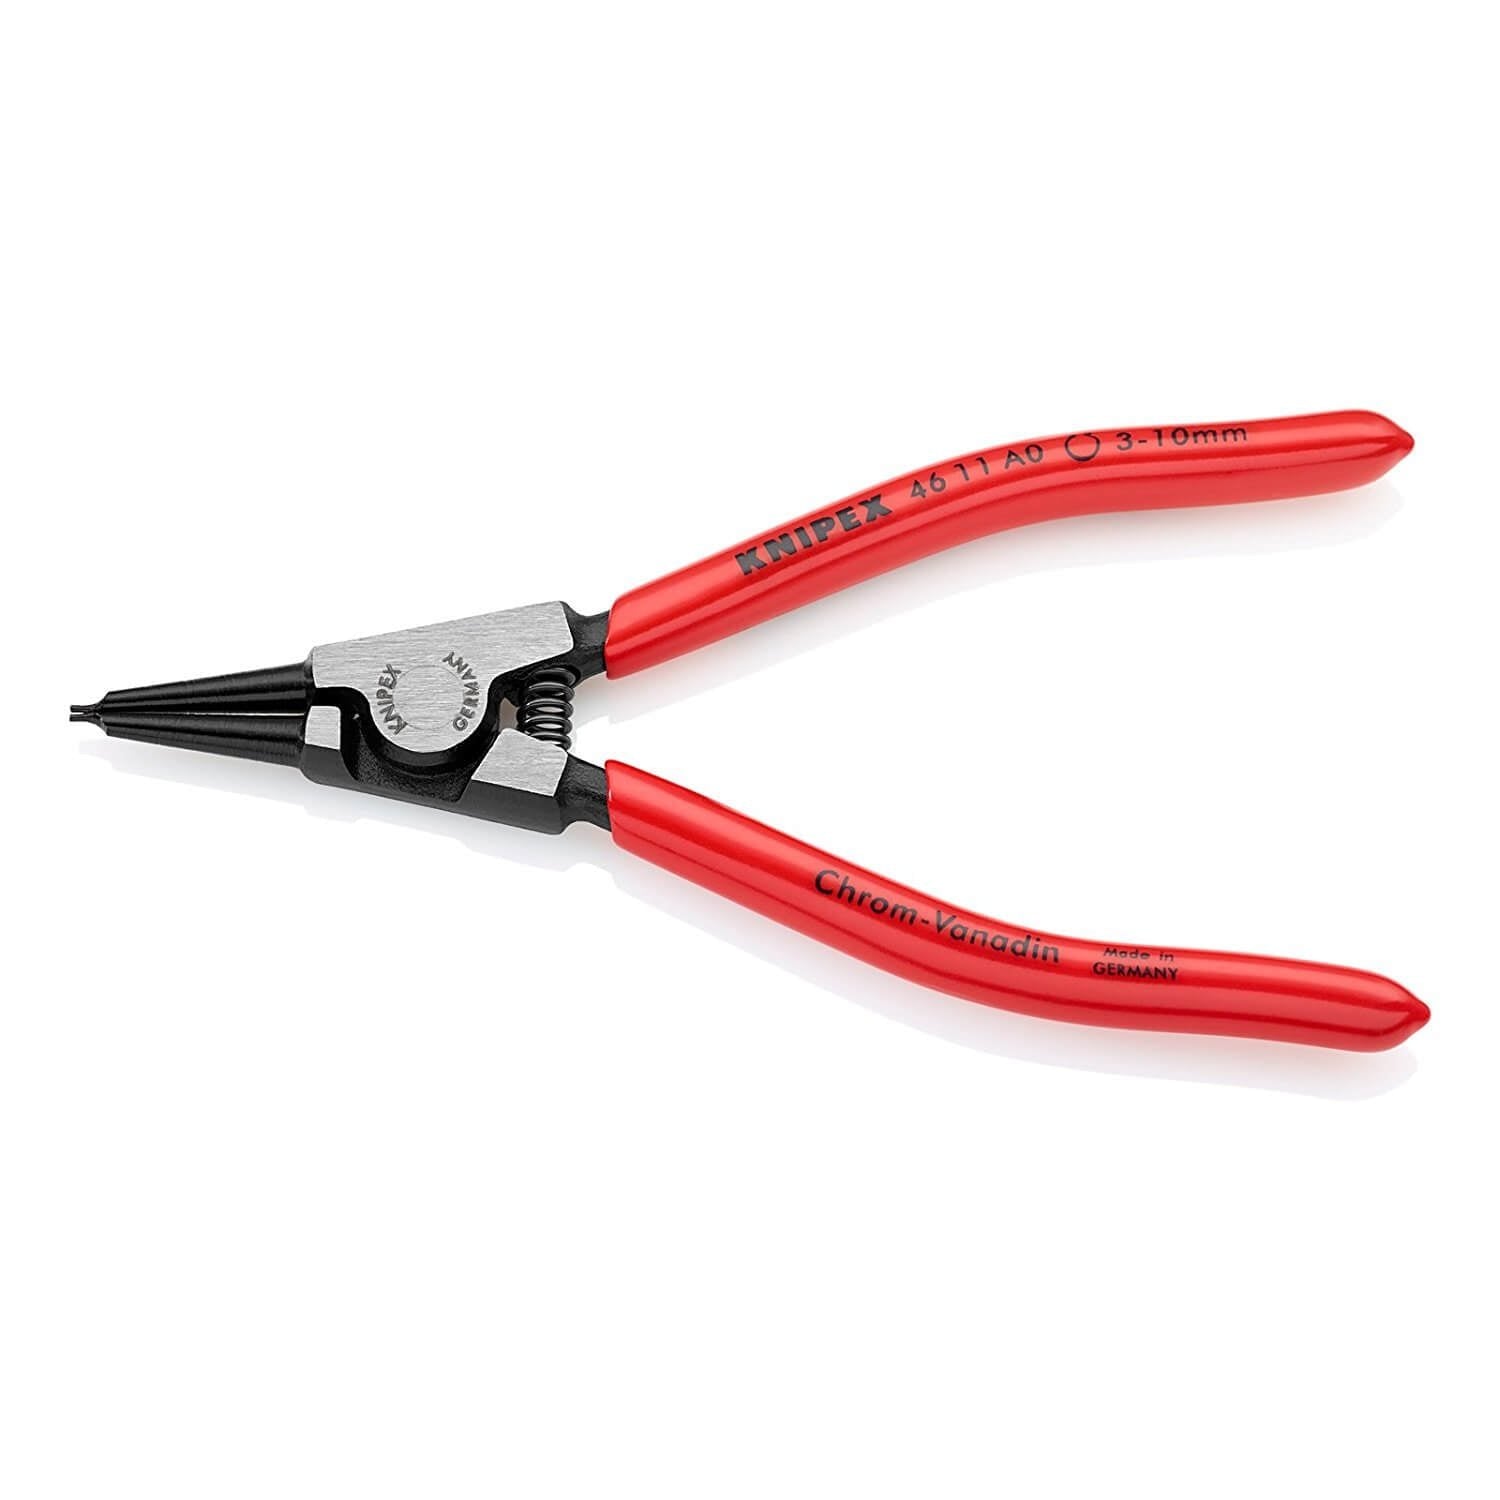 Knipex 4611A0 External Straight Retaining Ring Pliers 5.75-Inch